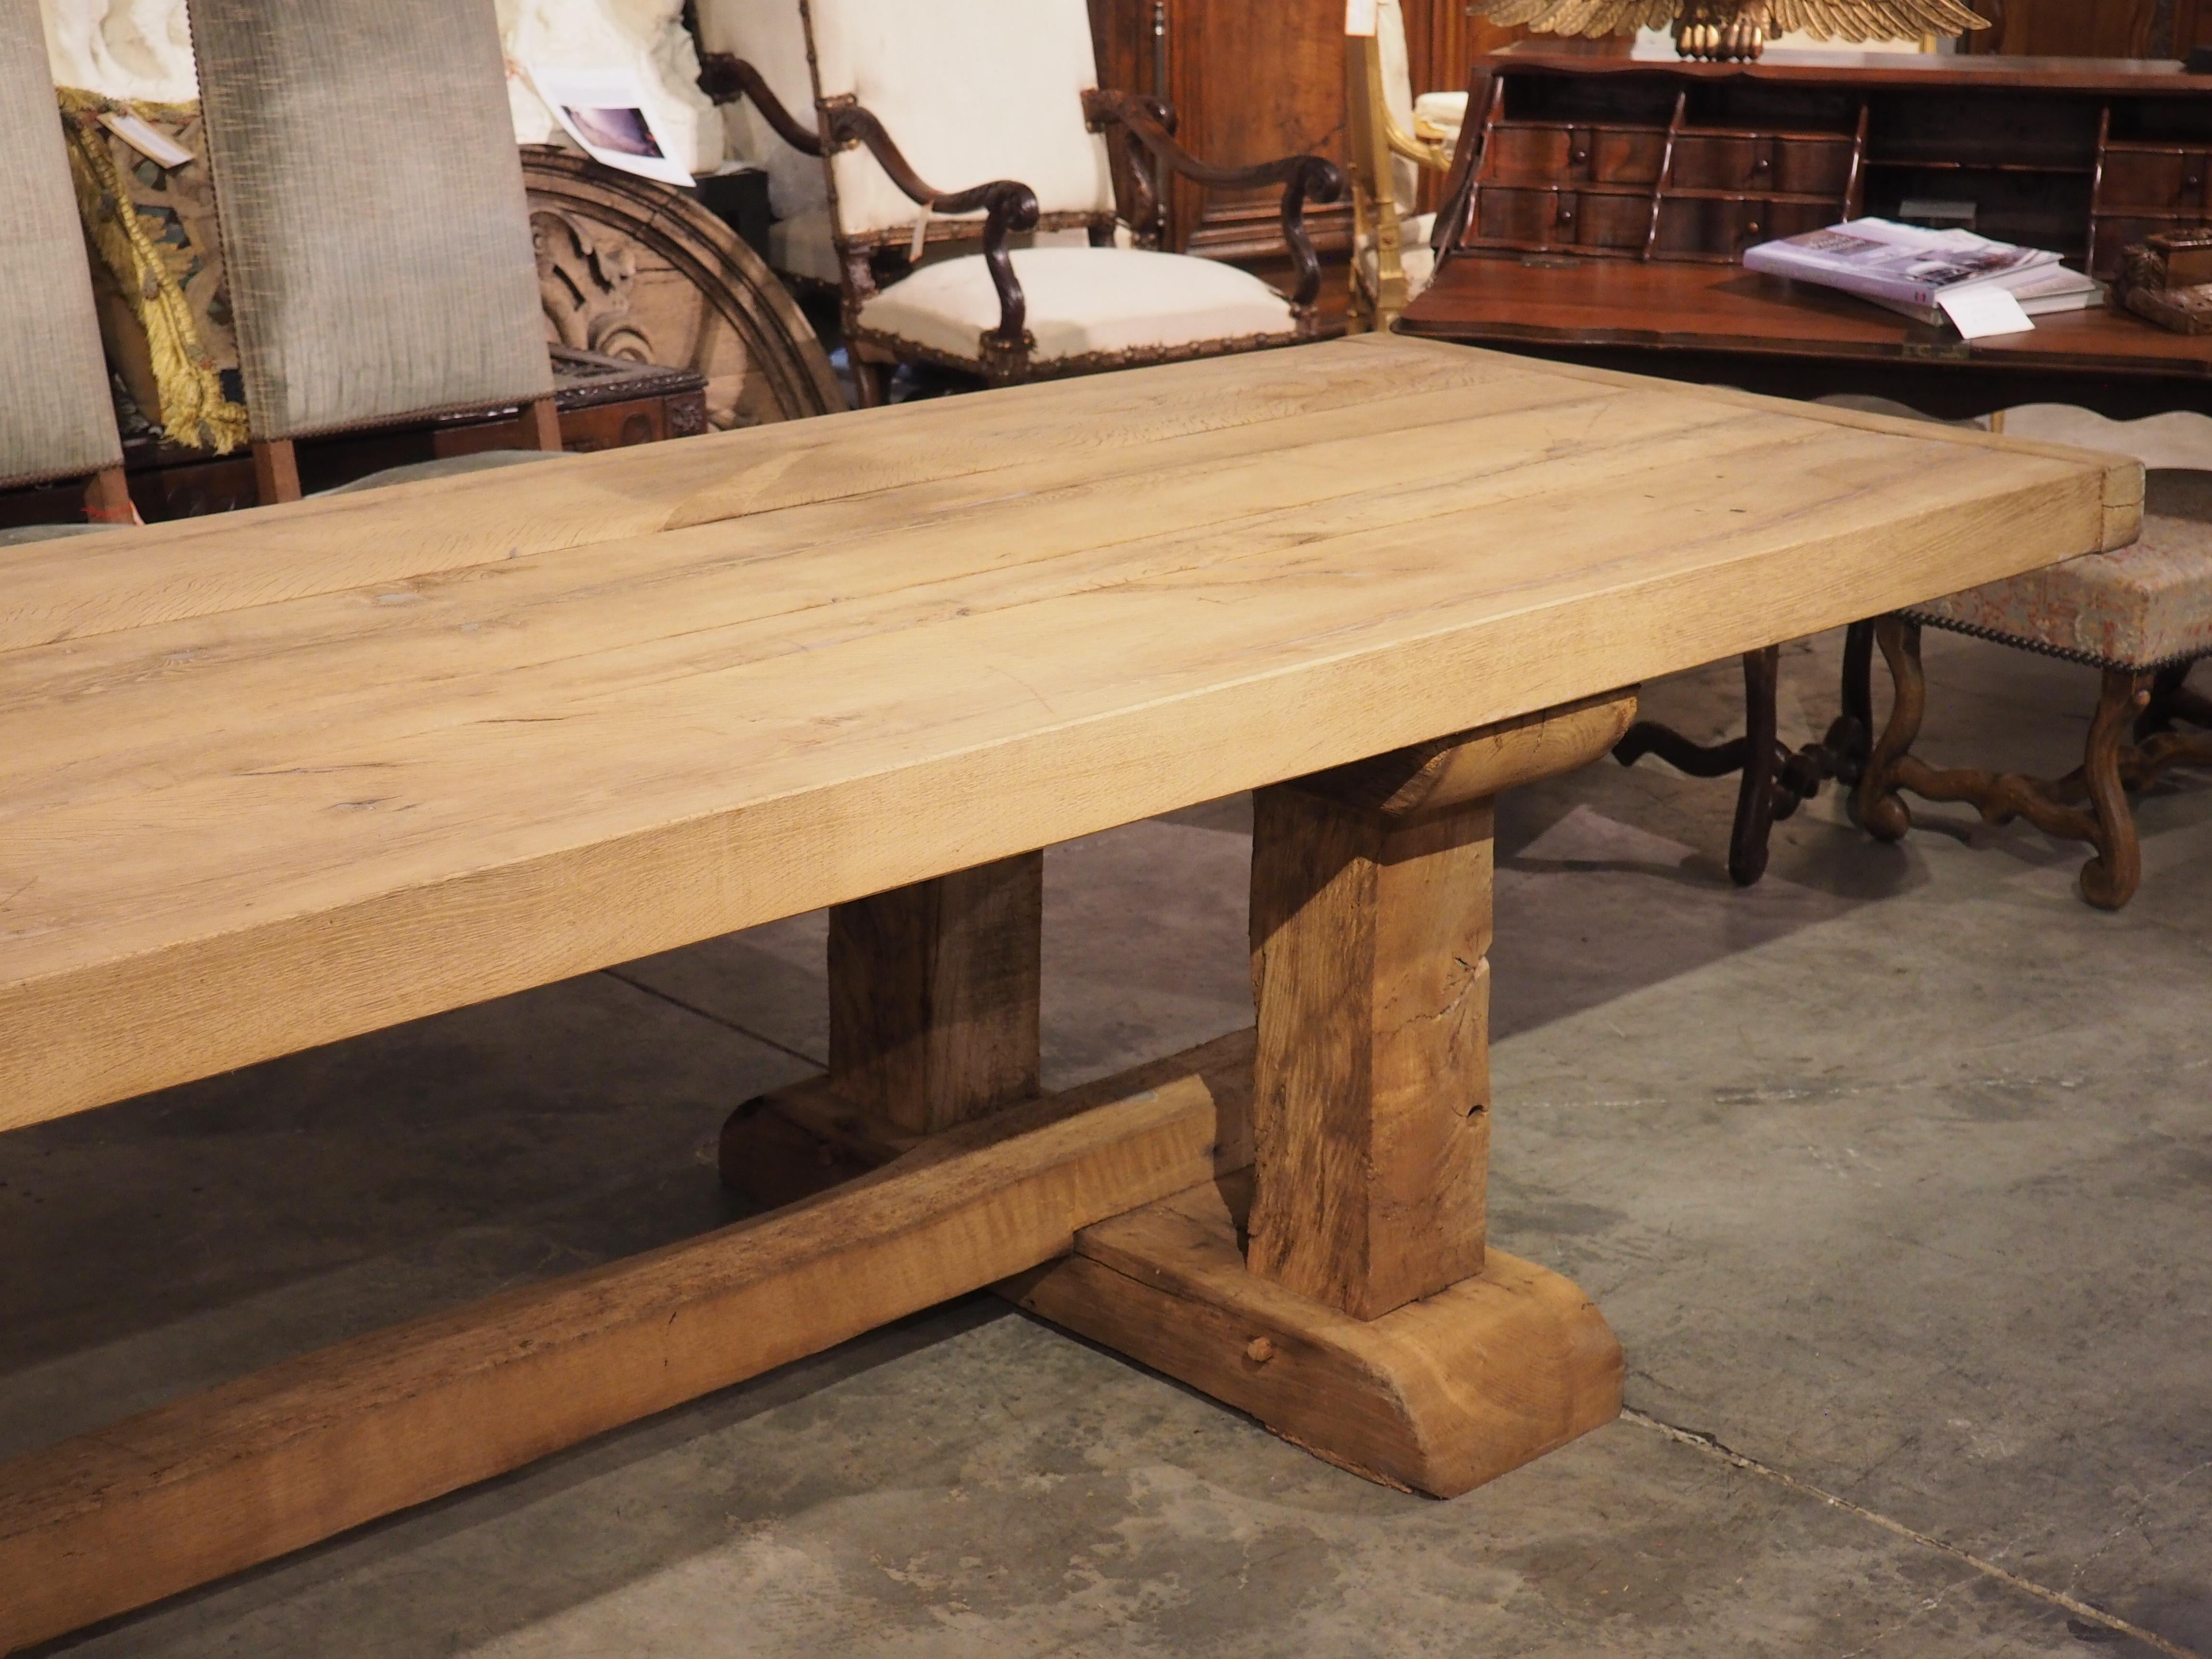 Wood Monumental Bleached Oak Dining Table from France, Early to Mid 1900s